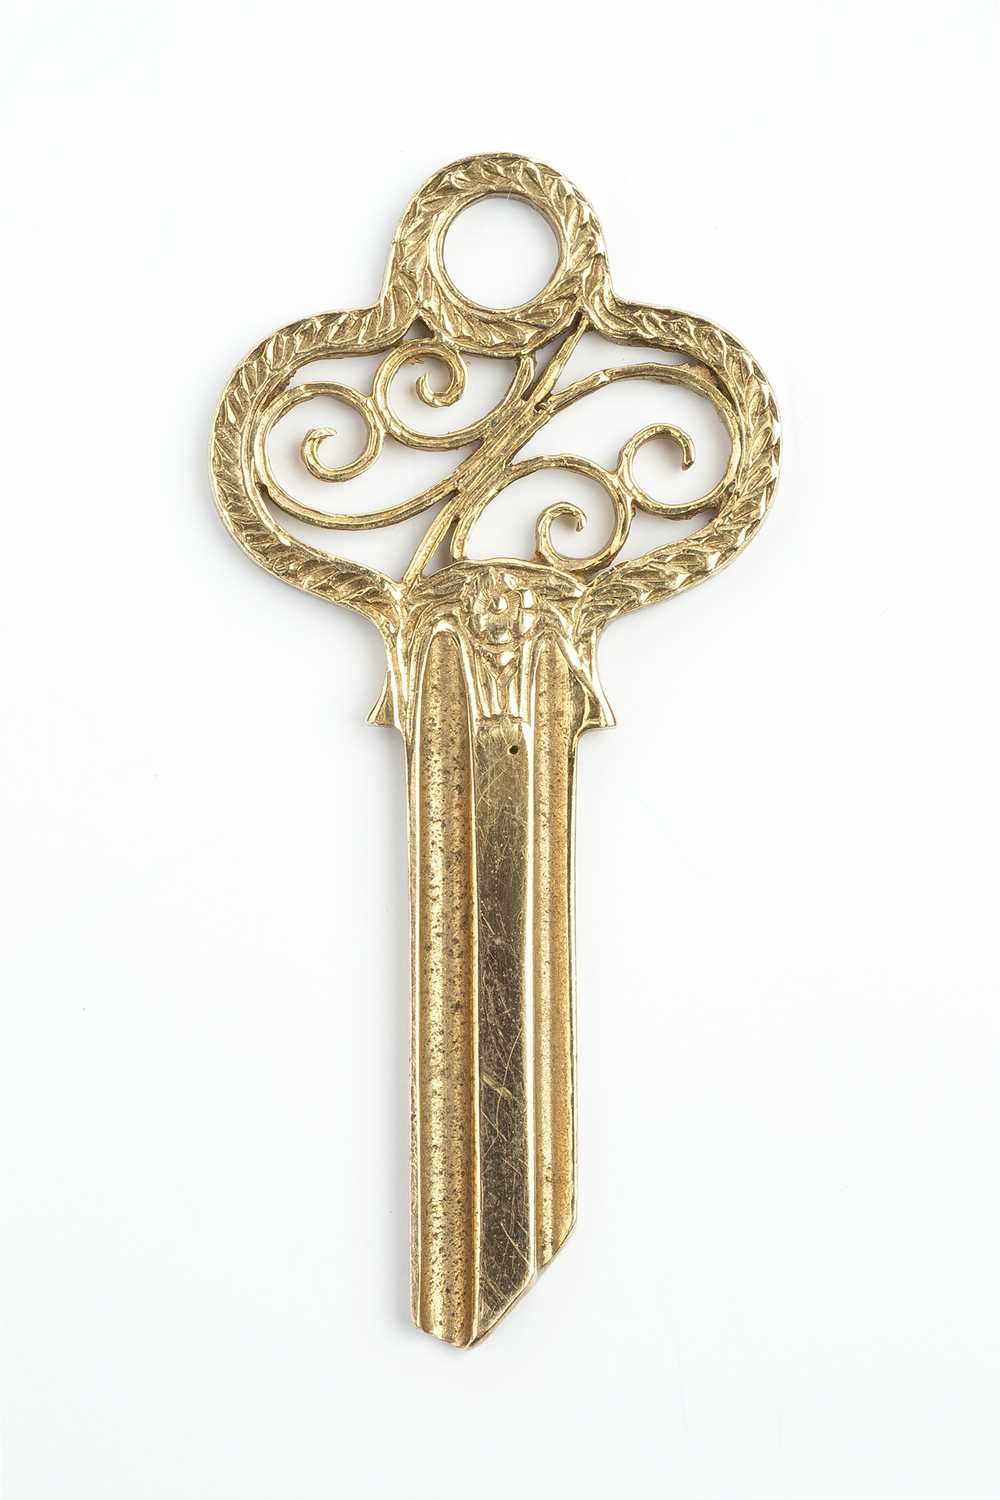 A 9ct gold key, the openwork scrolled surmount with foliate border, hallmarked for London 1965,